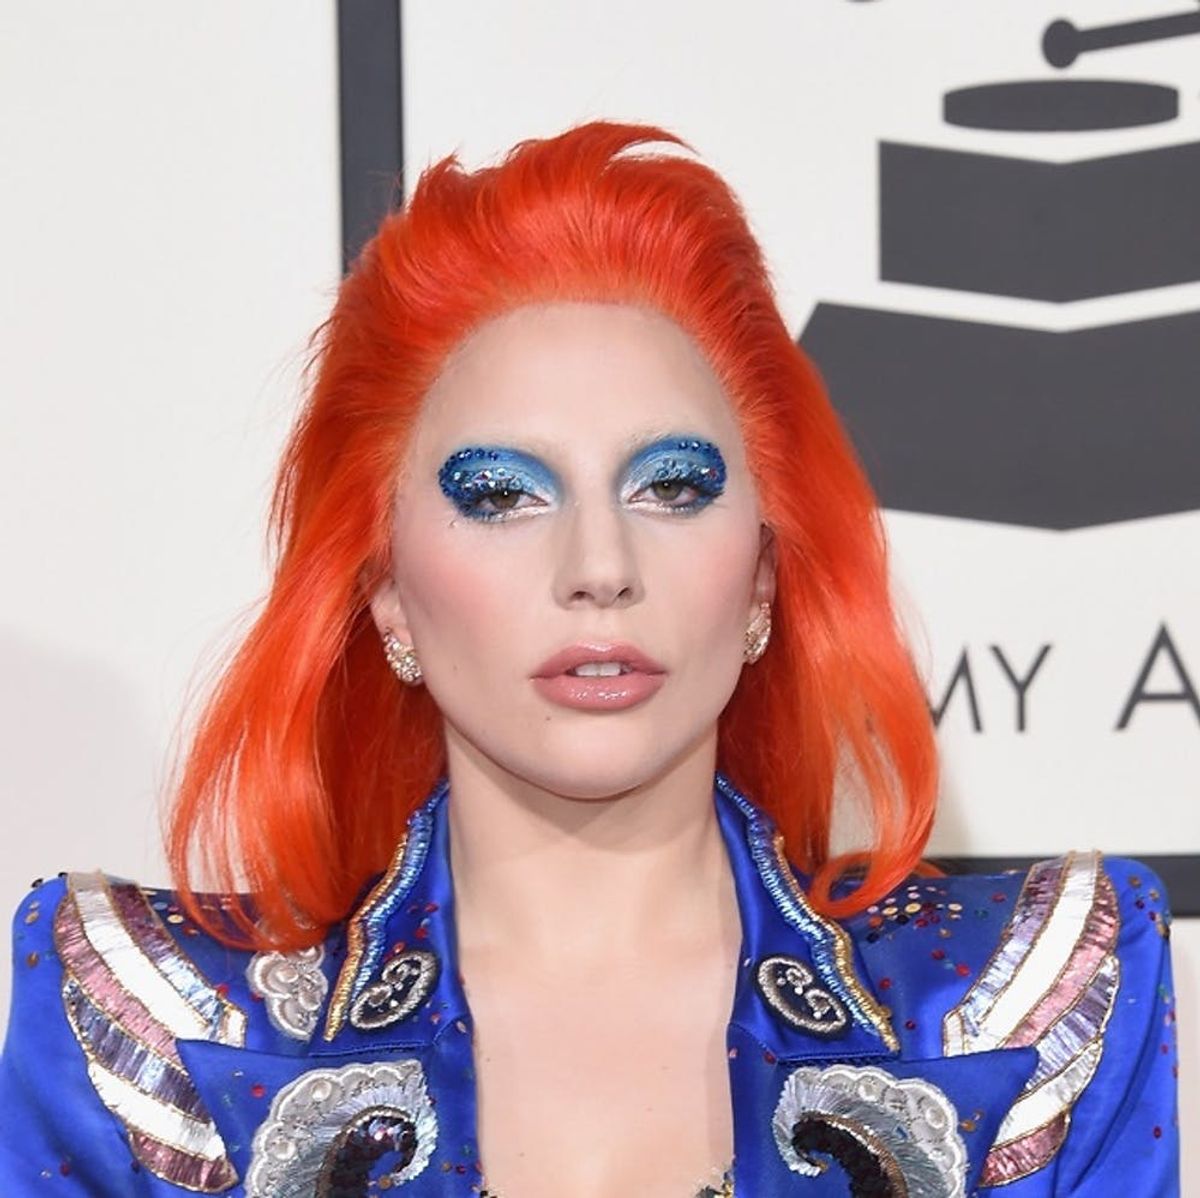 Lady Gaga Had The Grammys’ Most Tweeted-About Performance